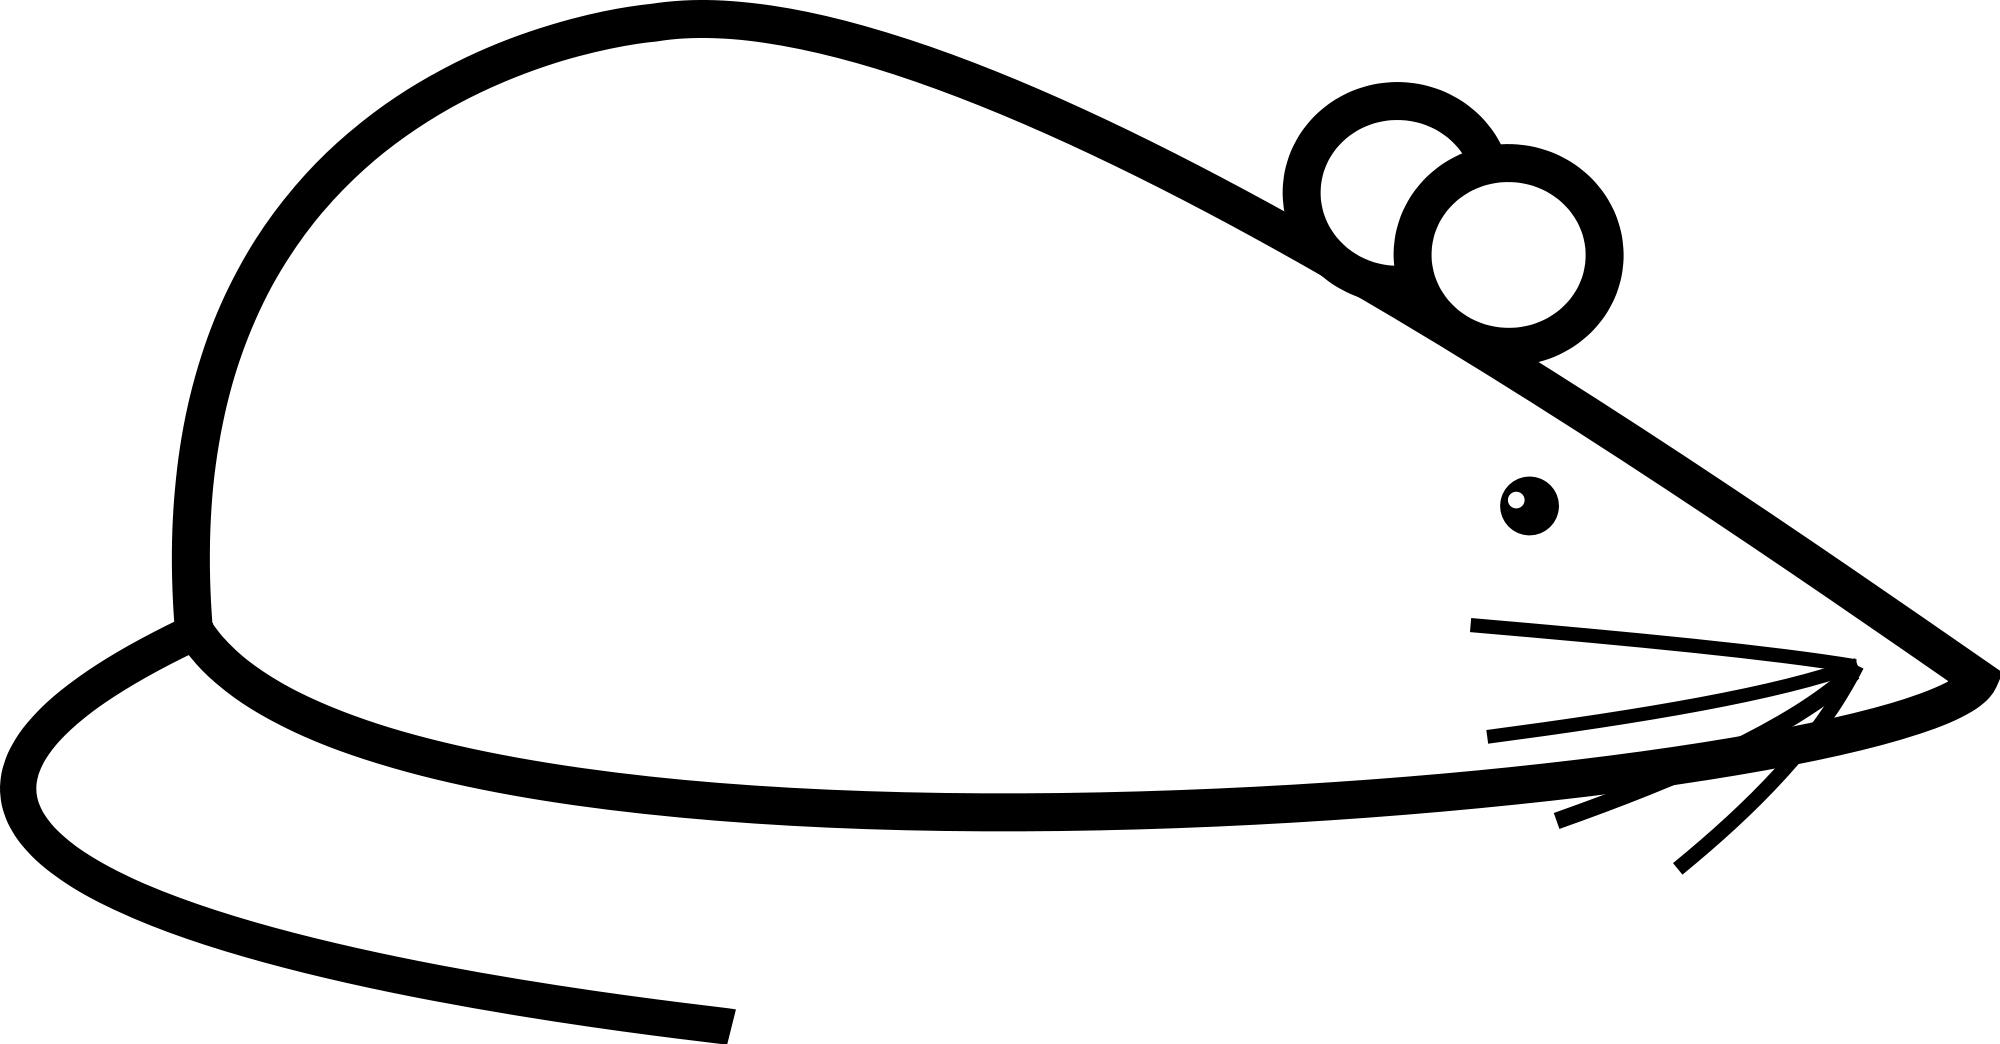 mice clipart simple